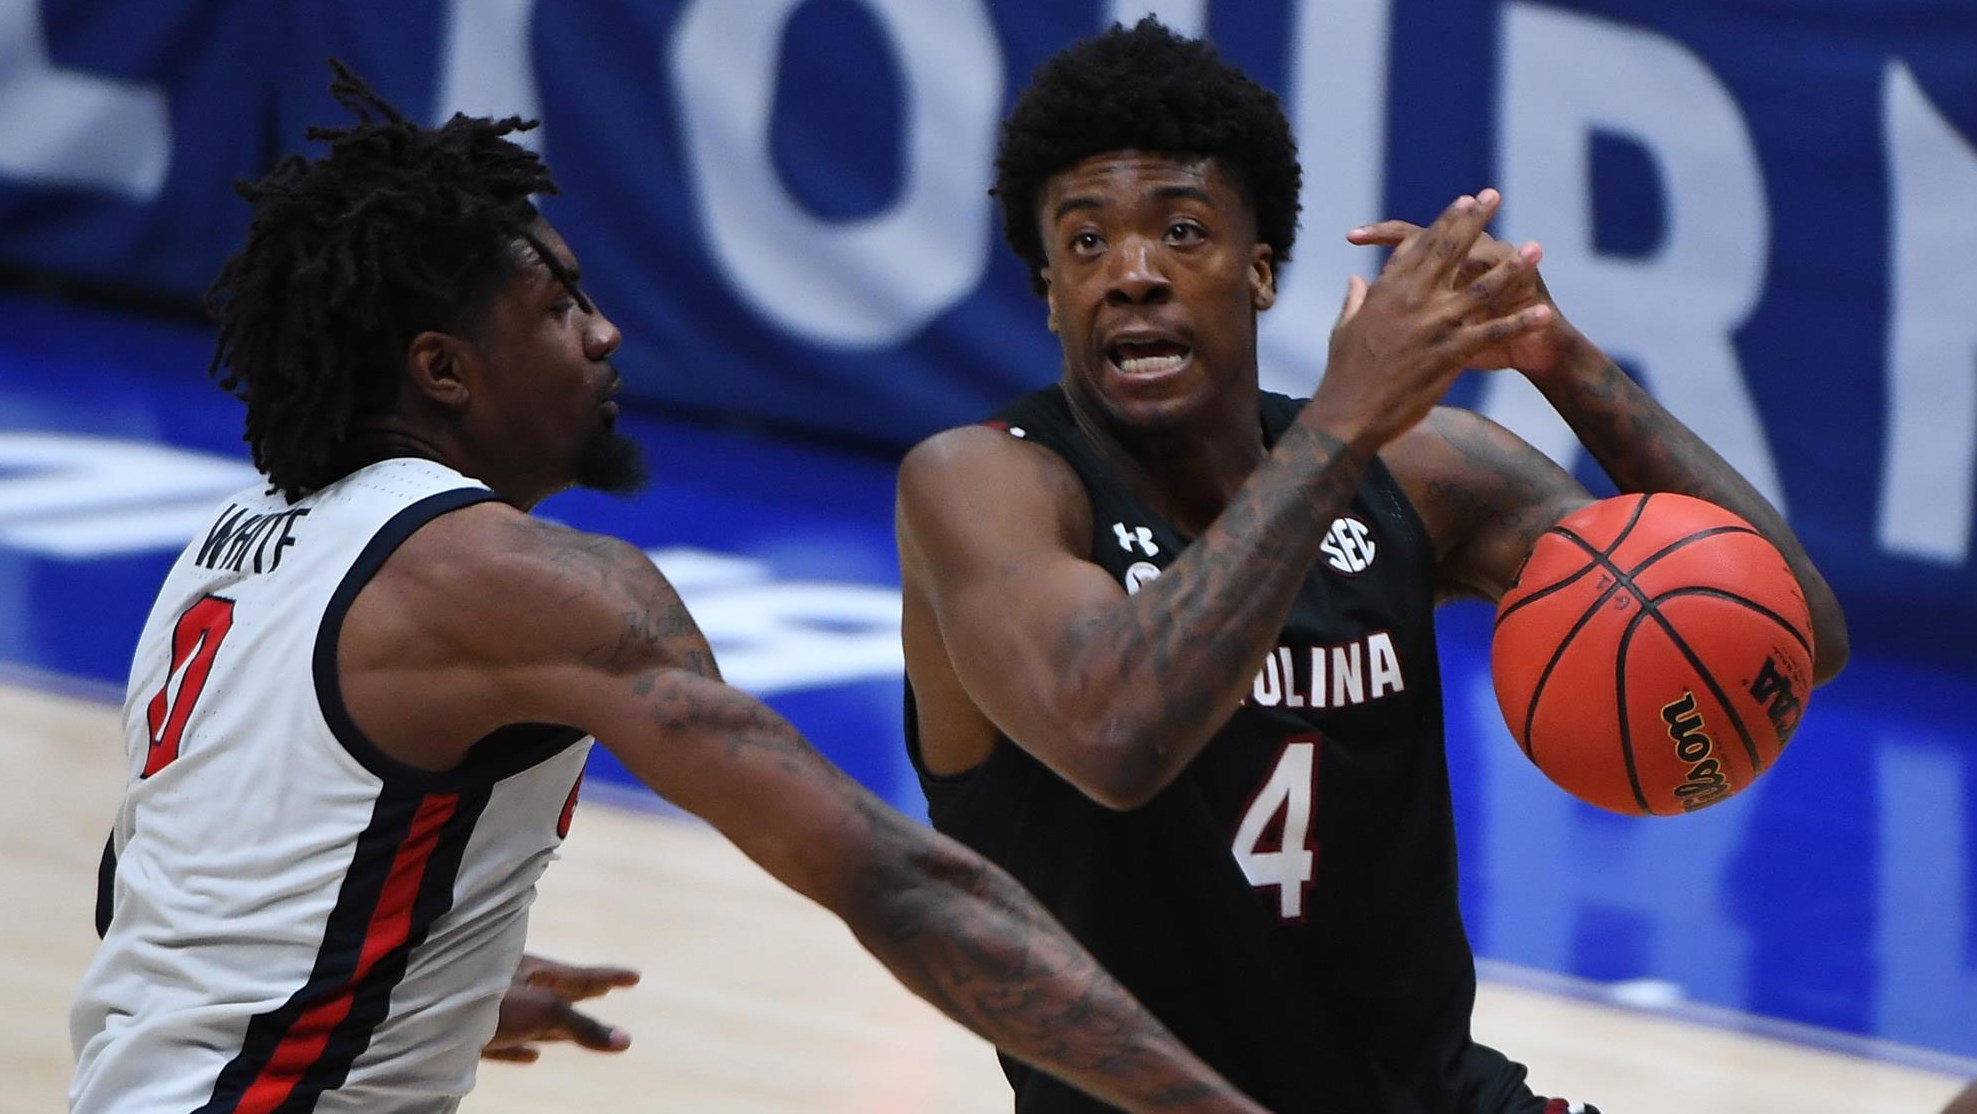 Joiner, Ole Miss beat South Carolina 76-59 in SEC Tournament